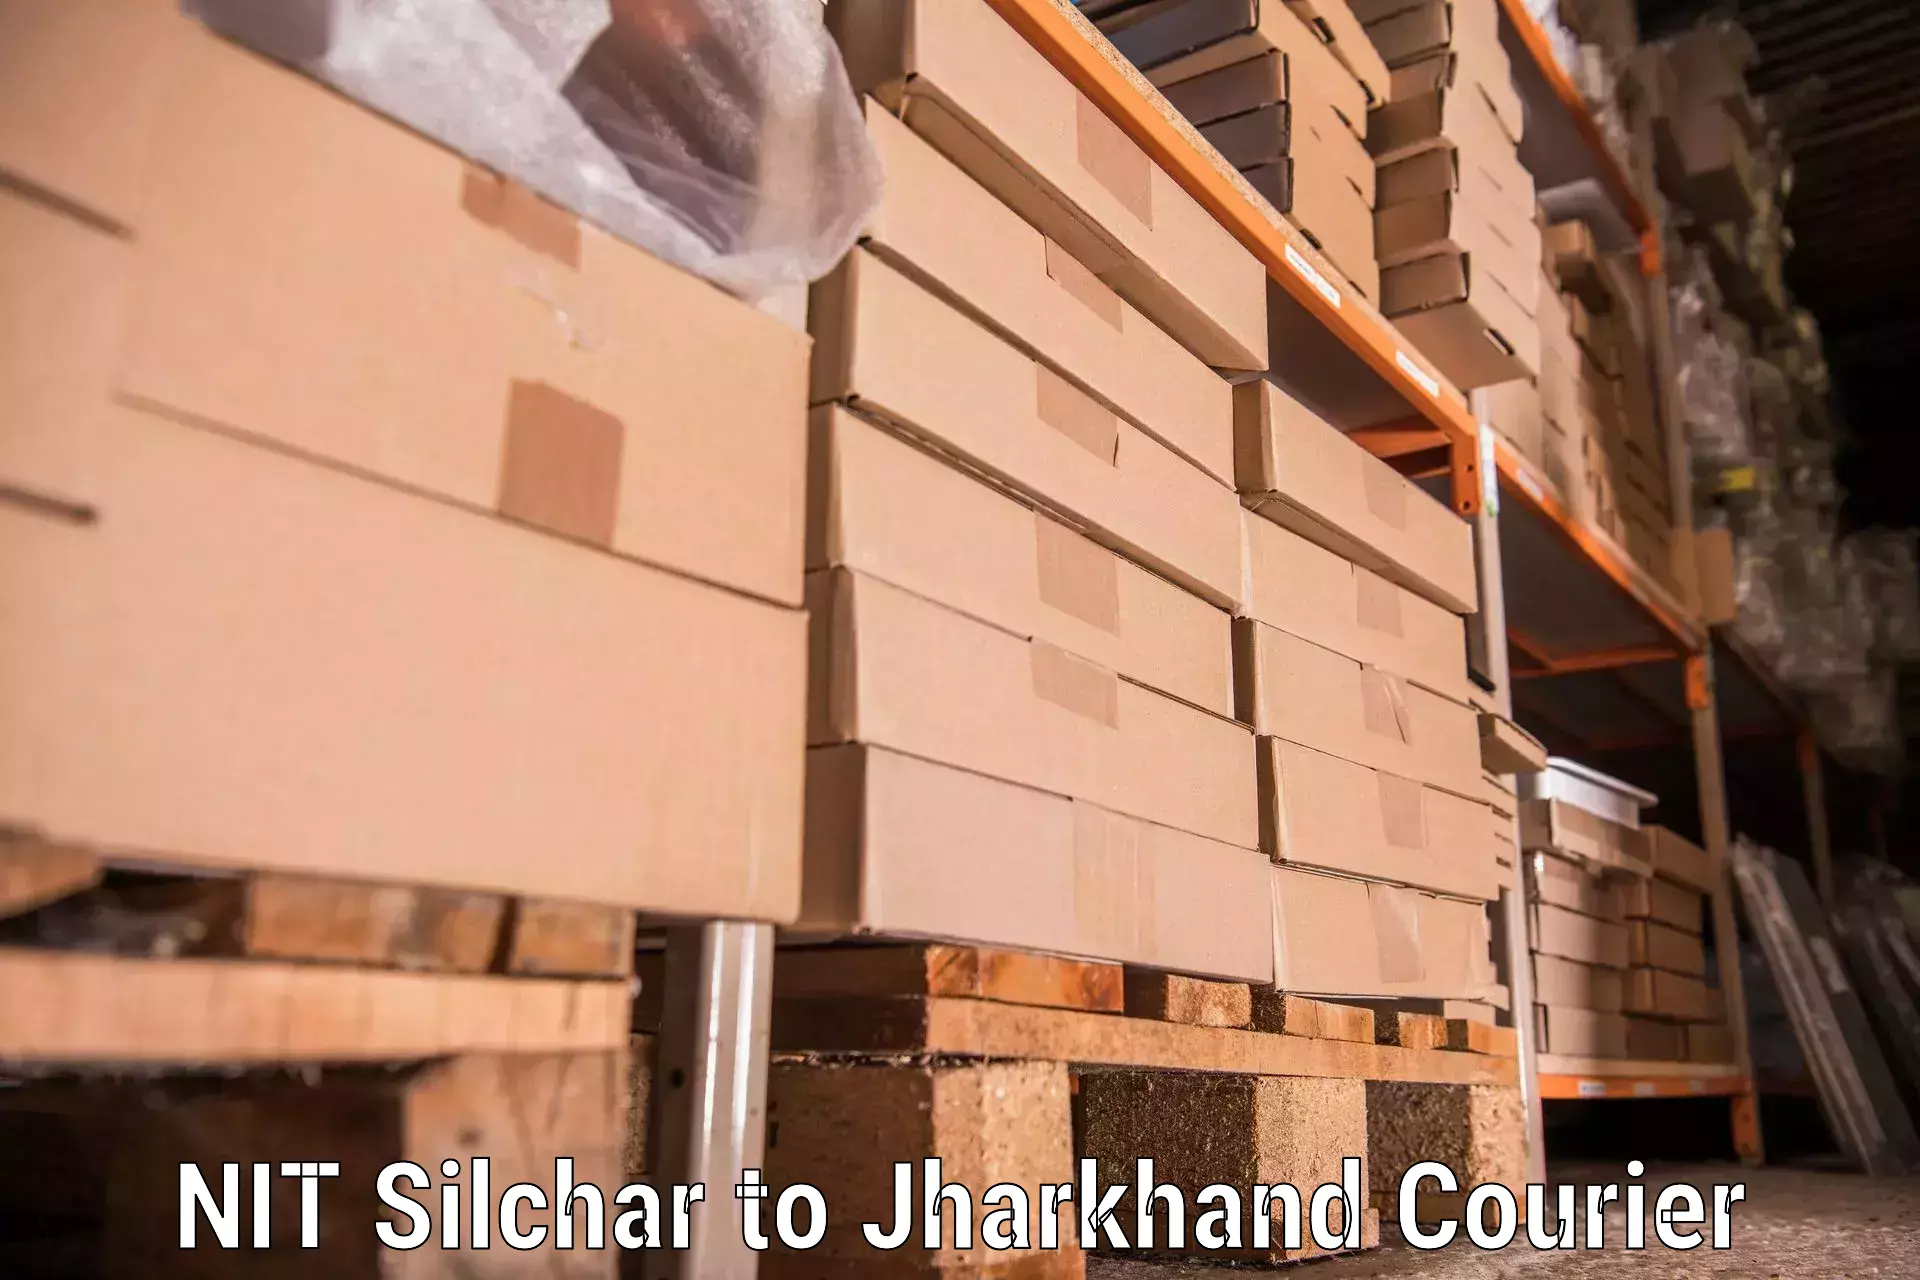 Professional home movers NIT Silchar to Topchanchi